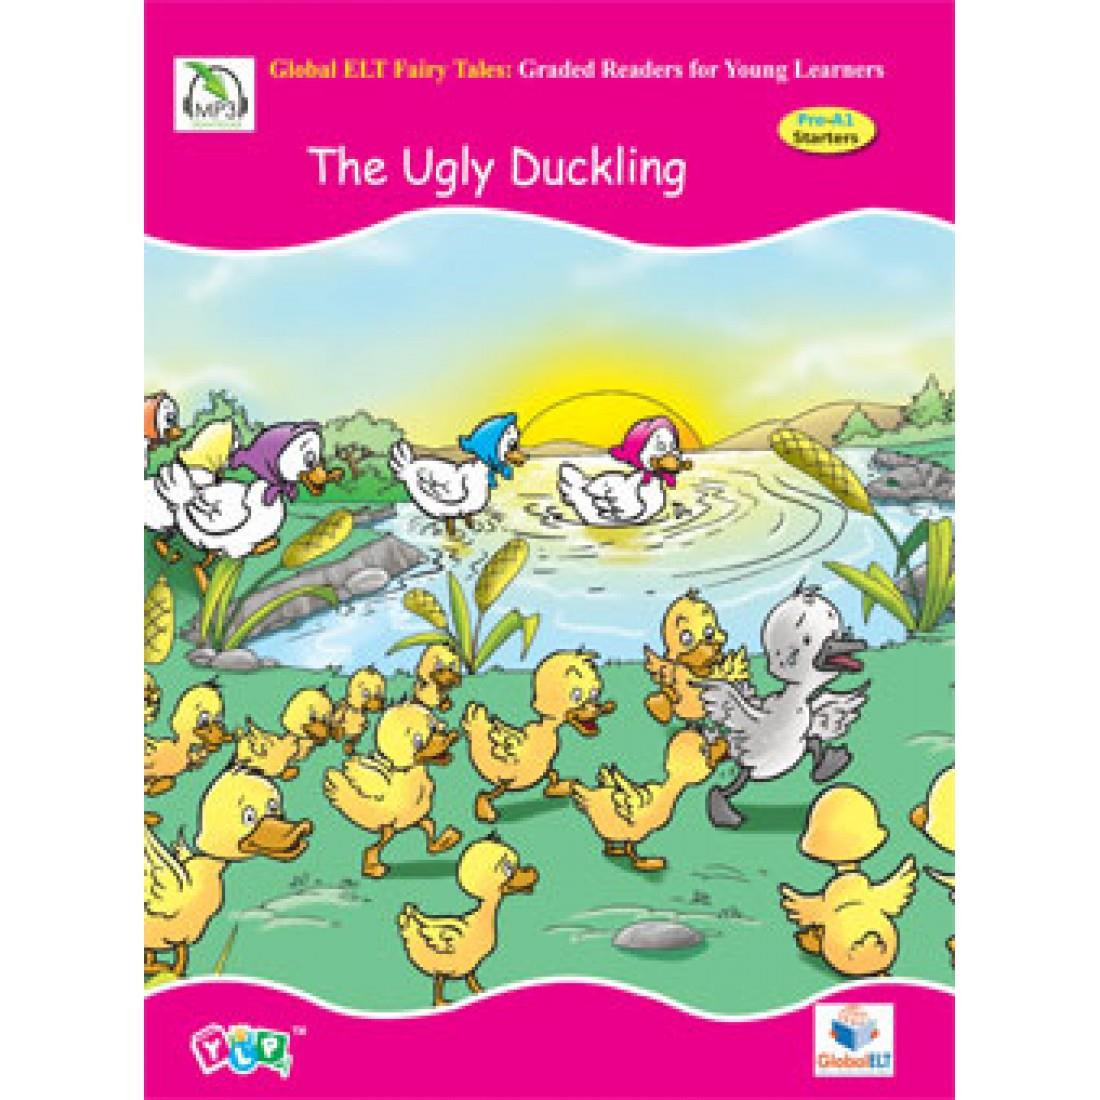 GEF : THE UGLY DUCKLING